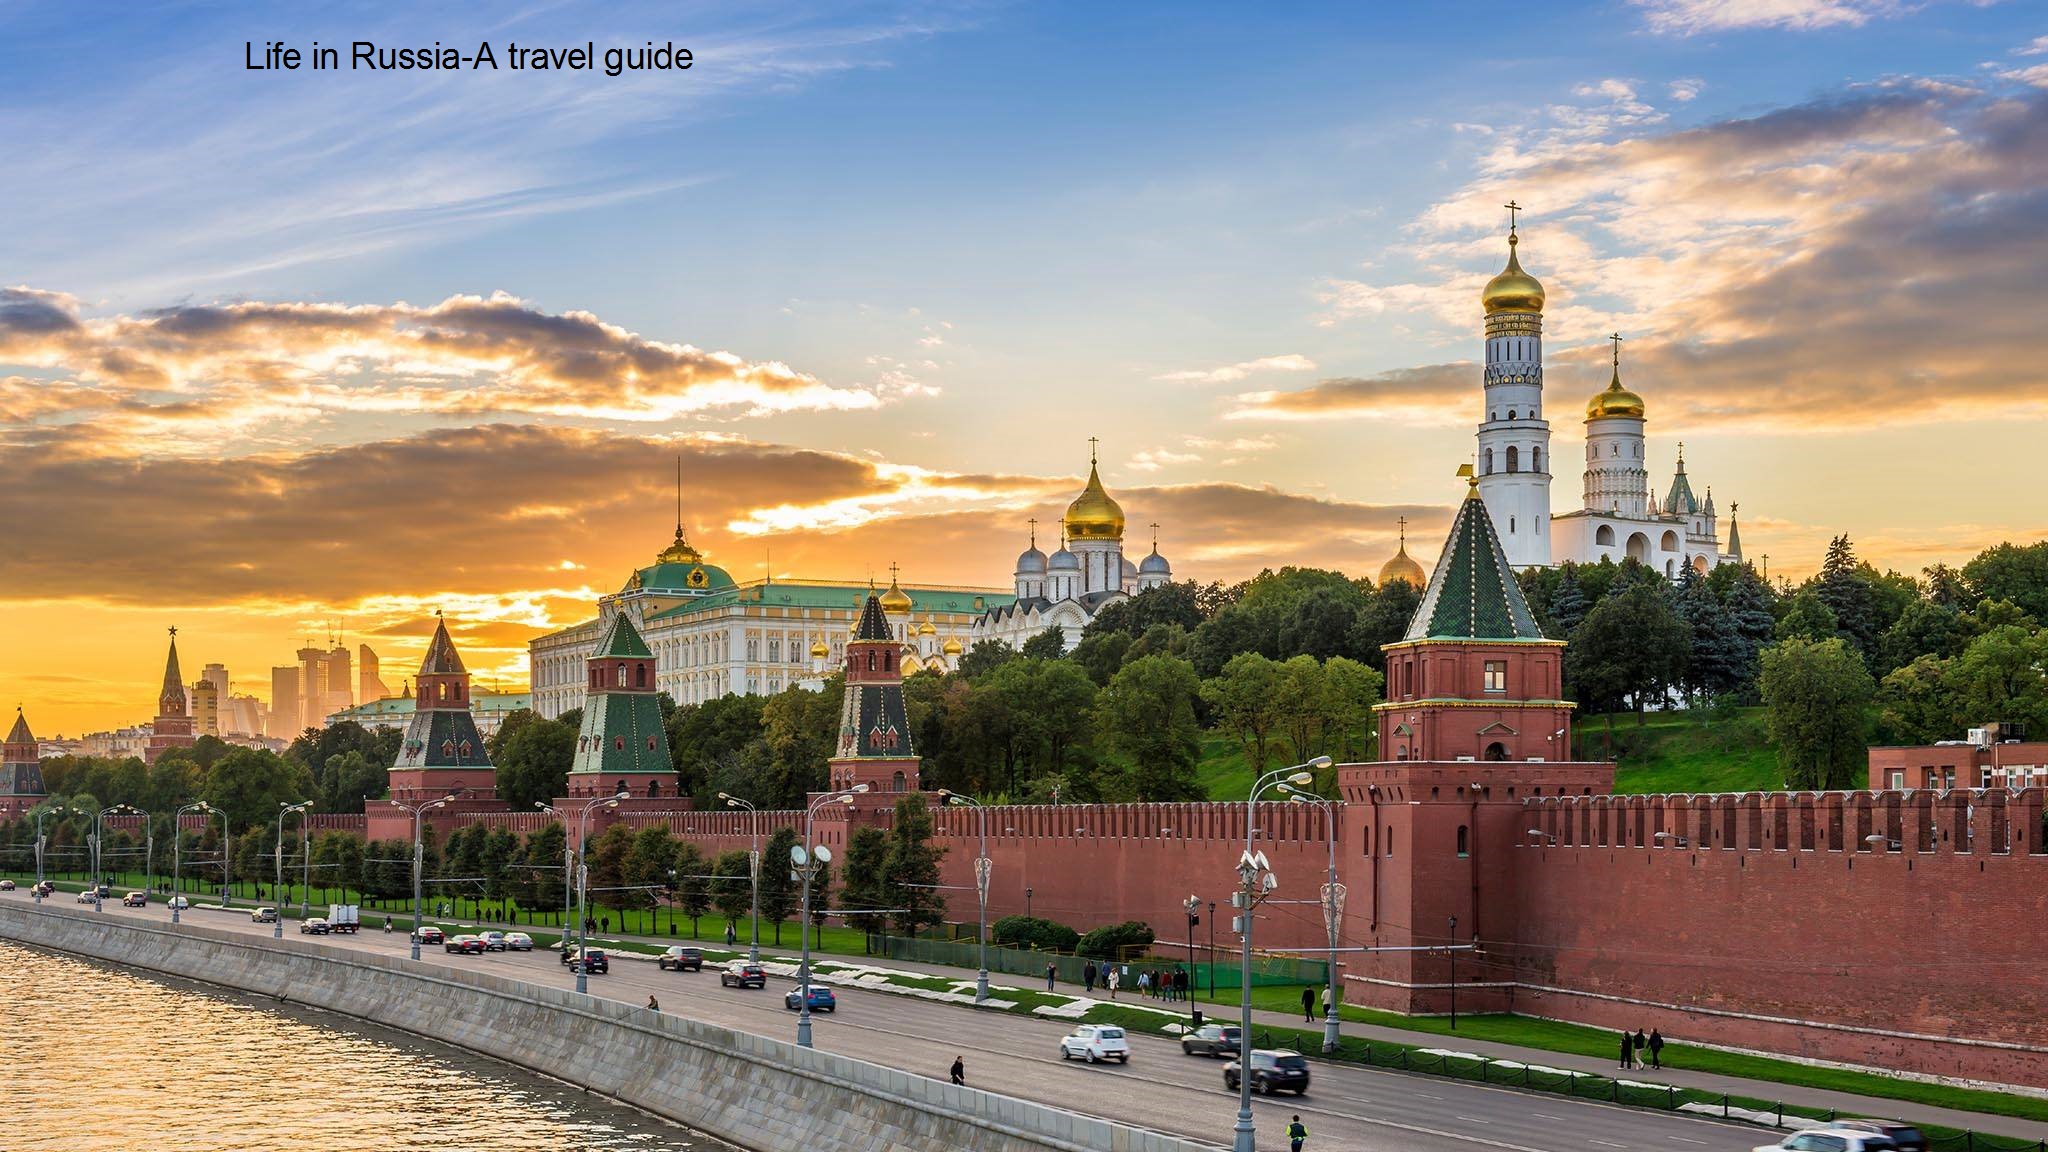 Life in Russia-A travel guide